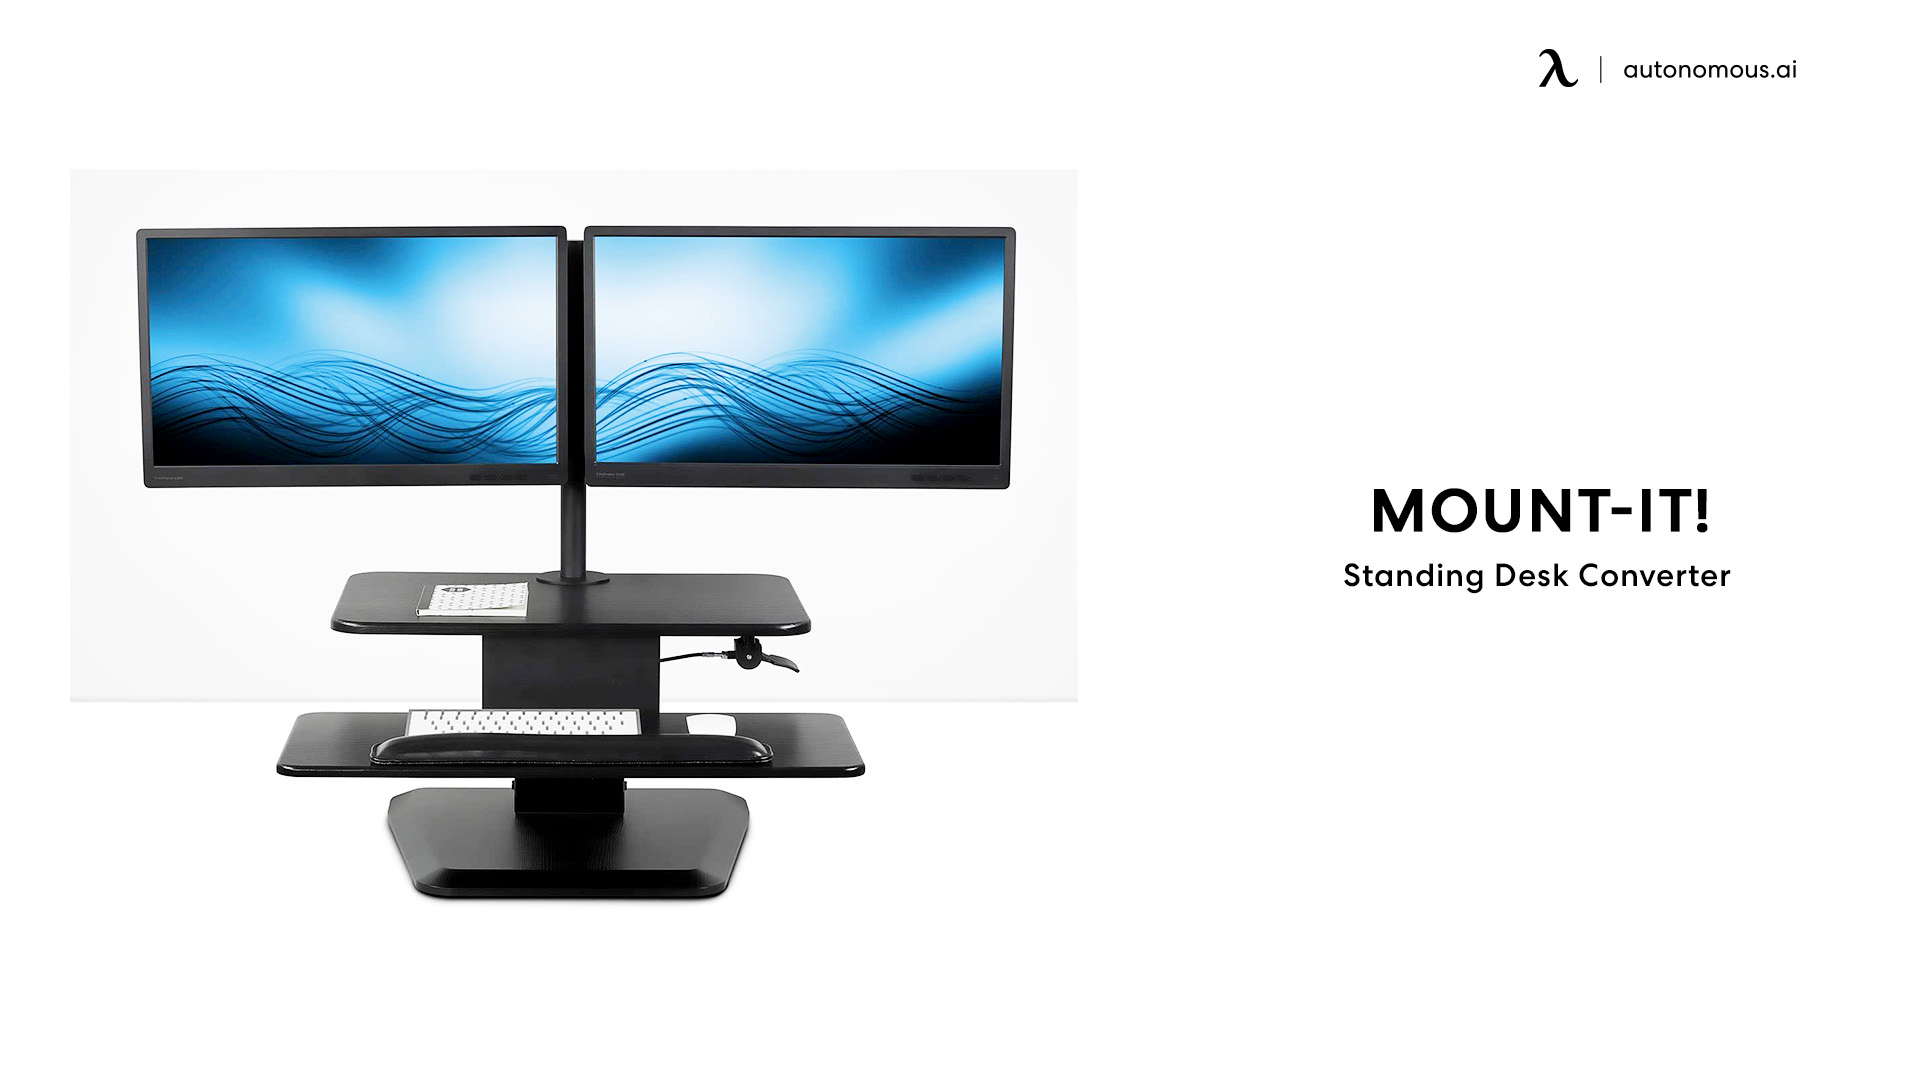 Mount-It! Desk Converter with Dual Monitor Mount